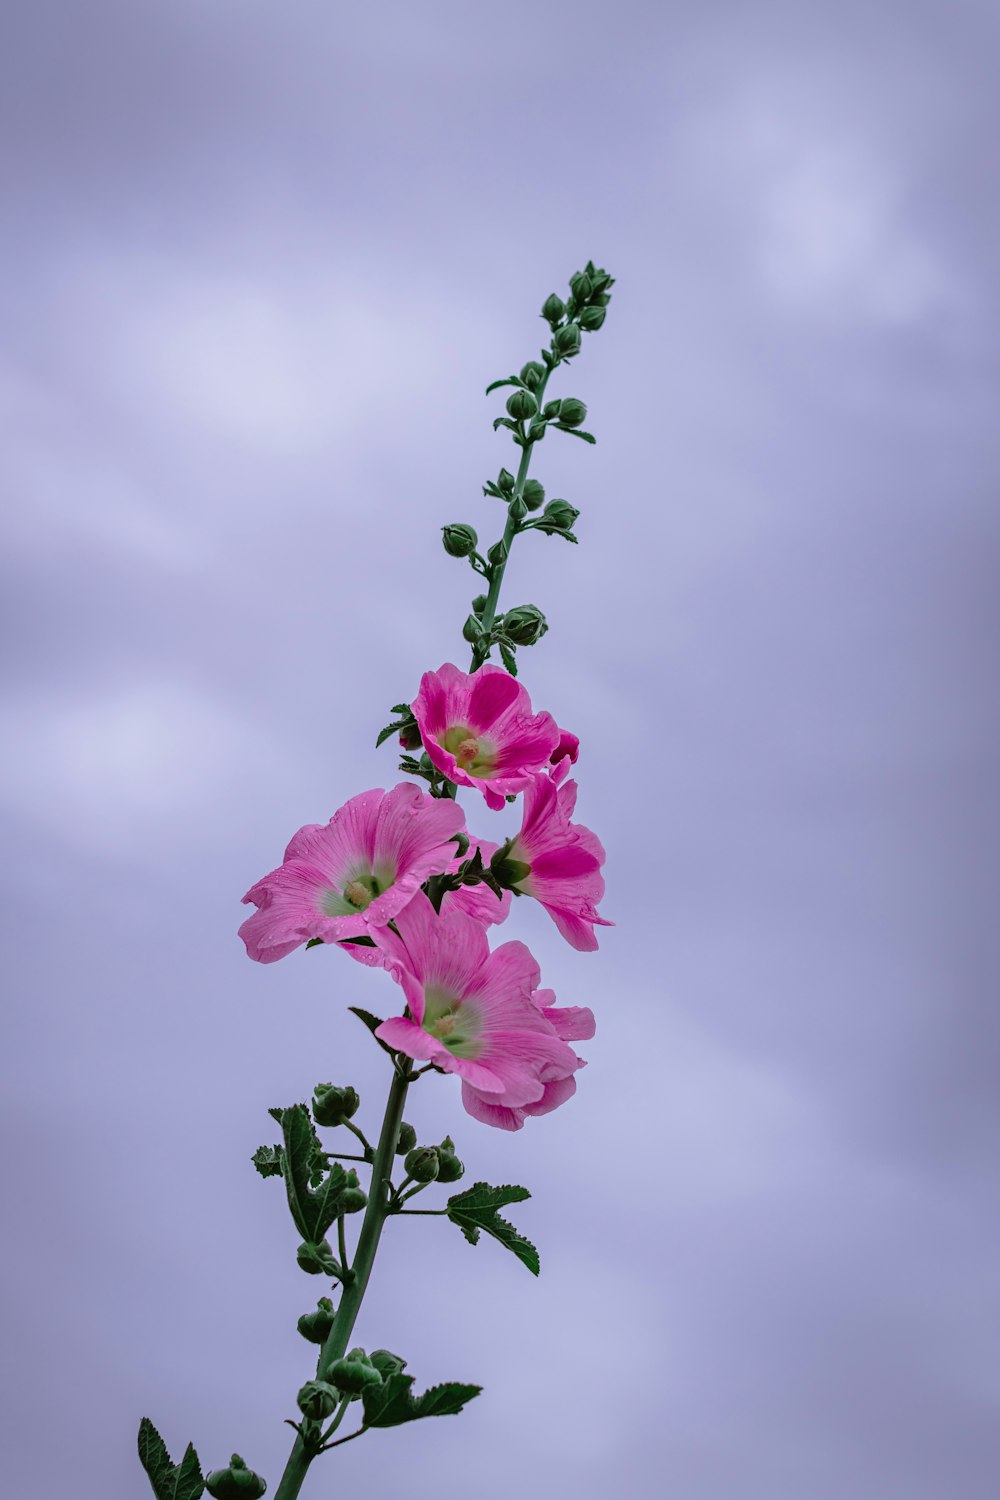 pink flower under cloudy sky during daytime